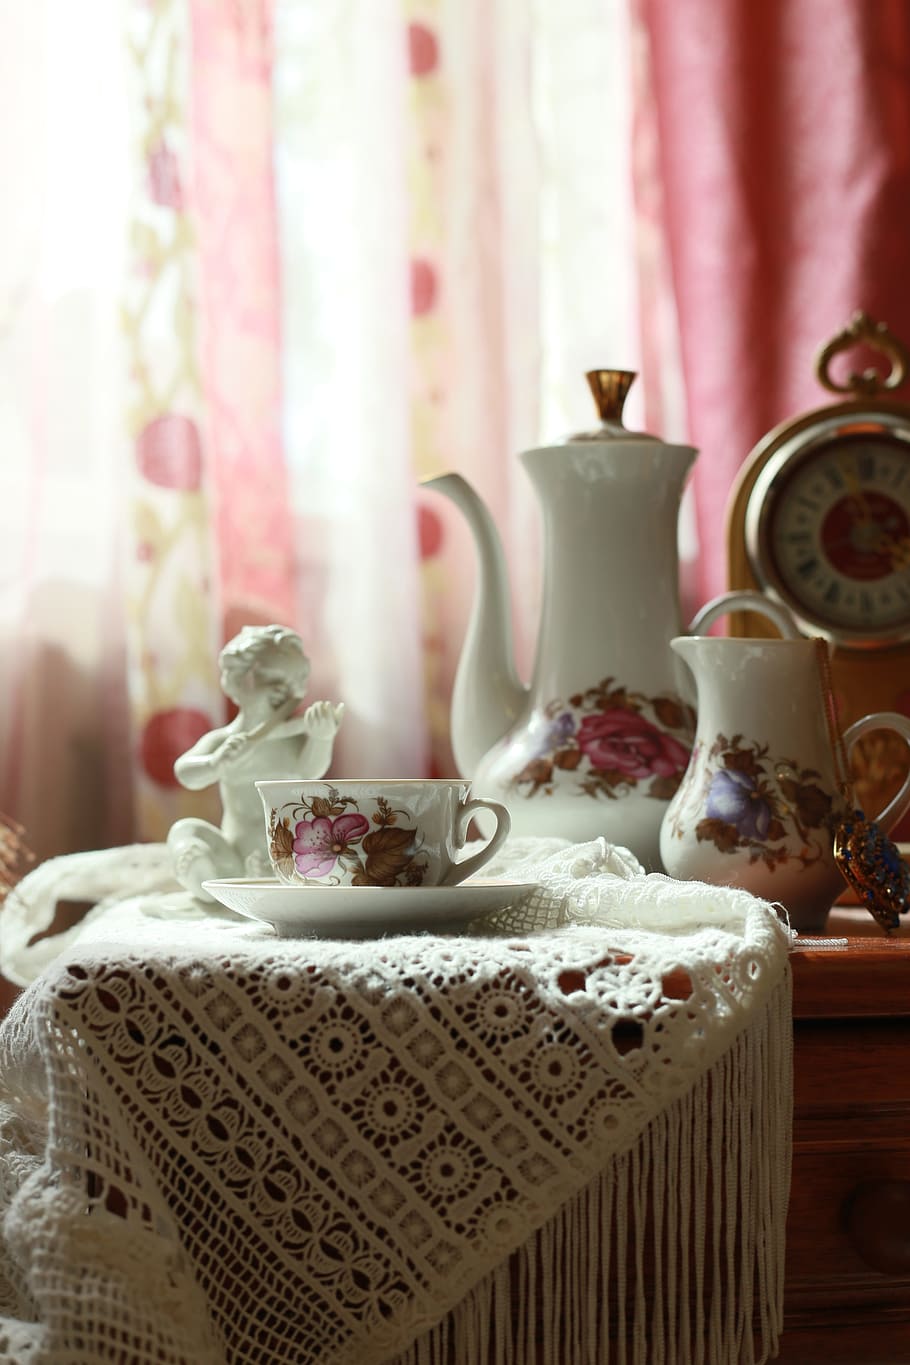 white-green-and-red, ceramic, tea, set, brown, table, white, crochet, tablecloth, service